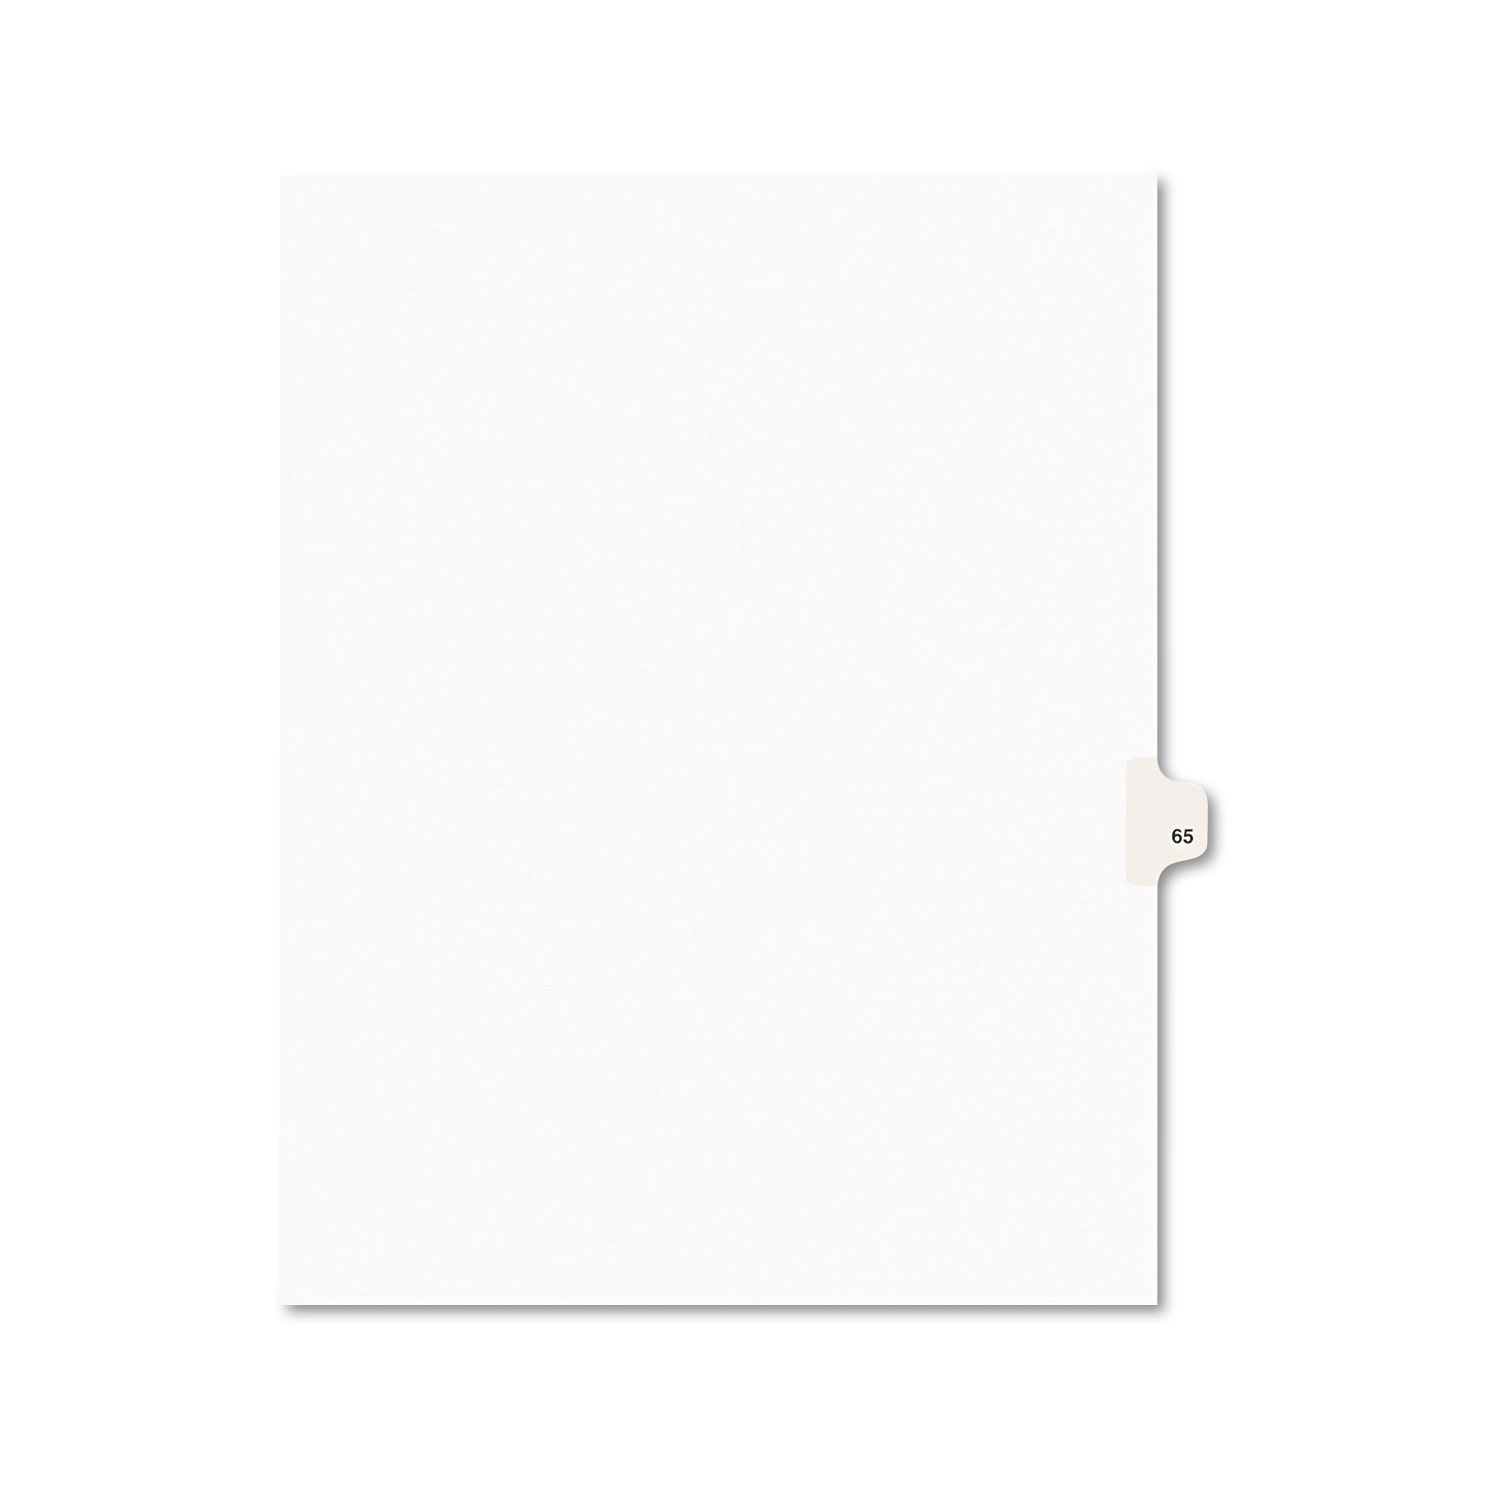  Avery 01065 Preprinted Legal Exhibit Side Tab Index Dividers, Avery Style, 10-Tab, 65, 11 x 8.5, White, 25/Pack (AVE01065) 